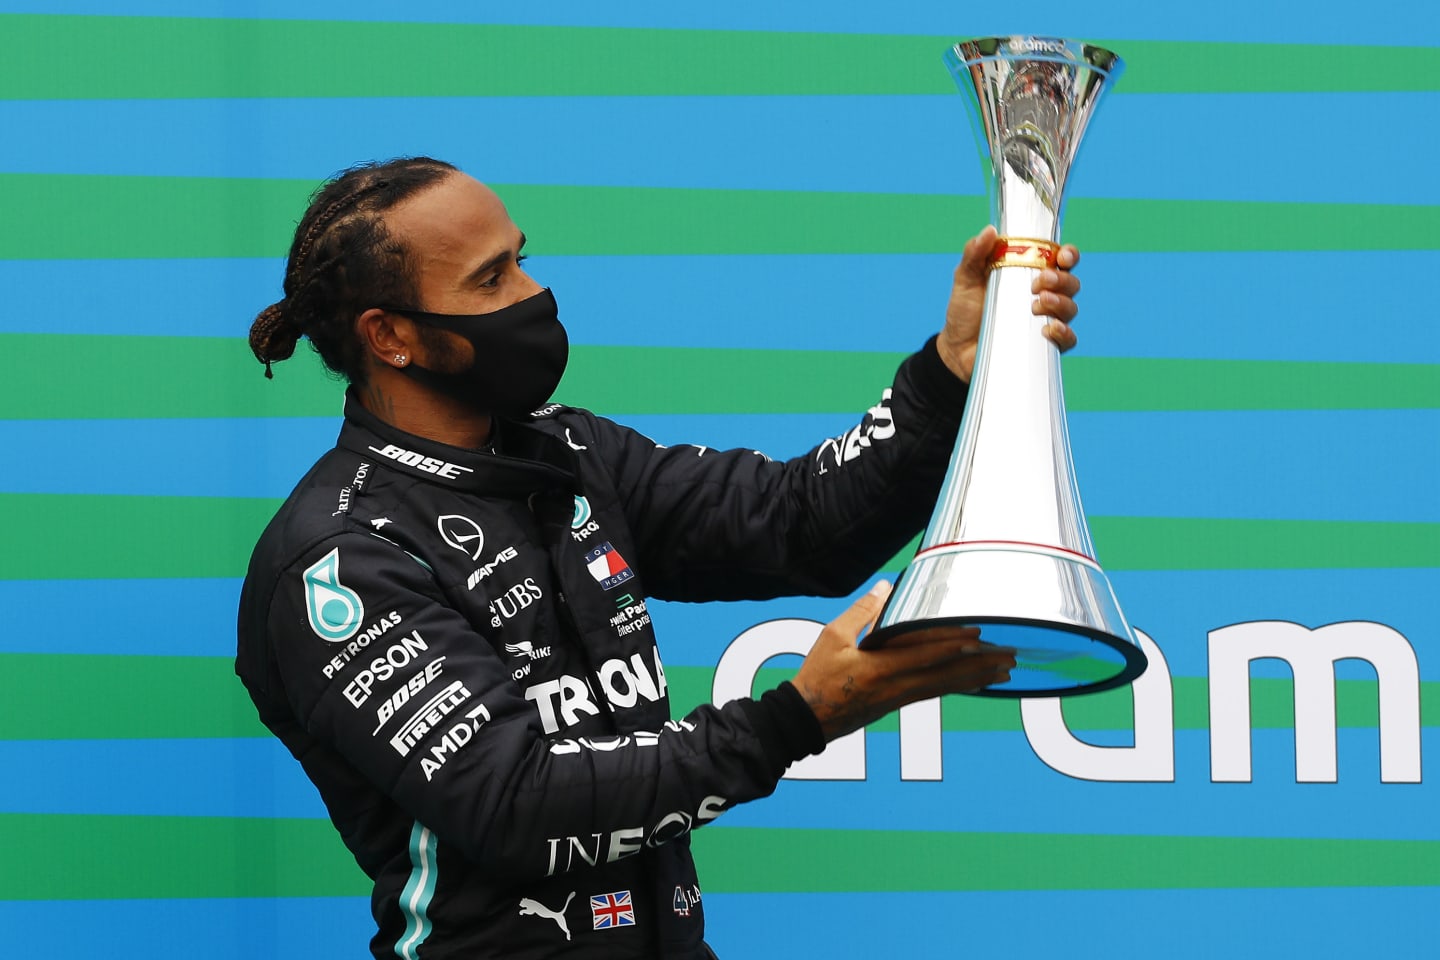 BUDAPEST, HUNGARY - JULY 19: Race winner Lewis Hamilton of Great Britain and Mercedes GP celebrates on the podium after the Formula One Grand Prix of Hungary at Hungaroring on July 19, 2020 in Budapest, Hungary. (Photo by Leonhard Foeger/Pool via Getty Images)